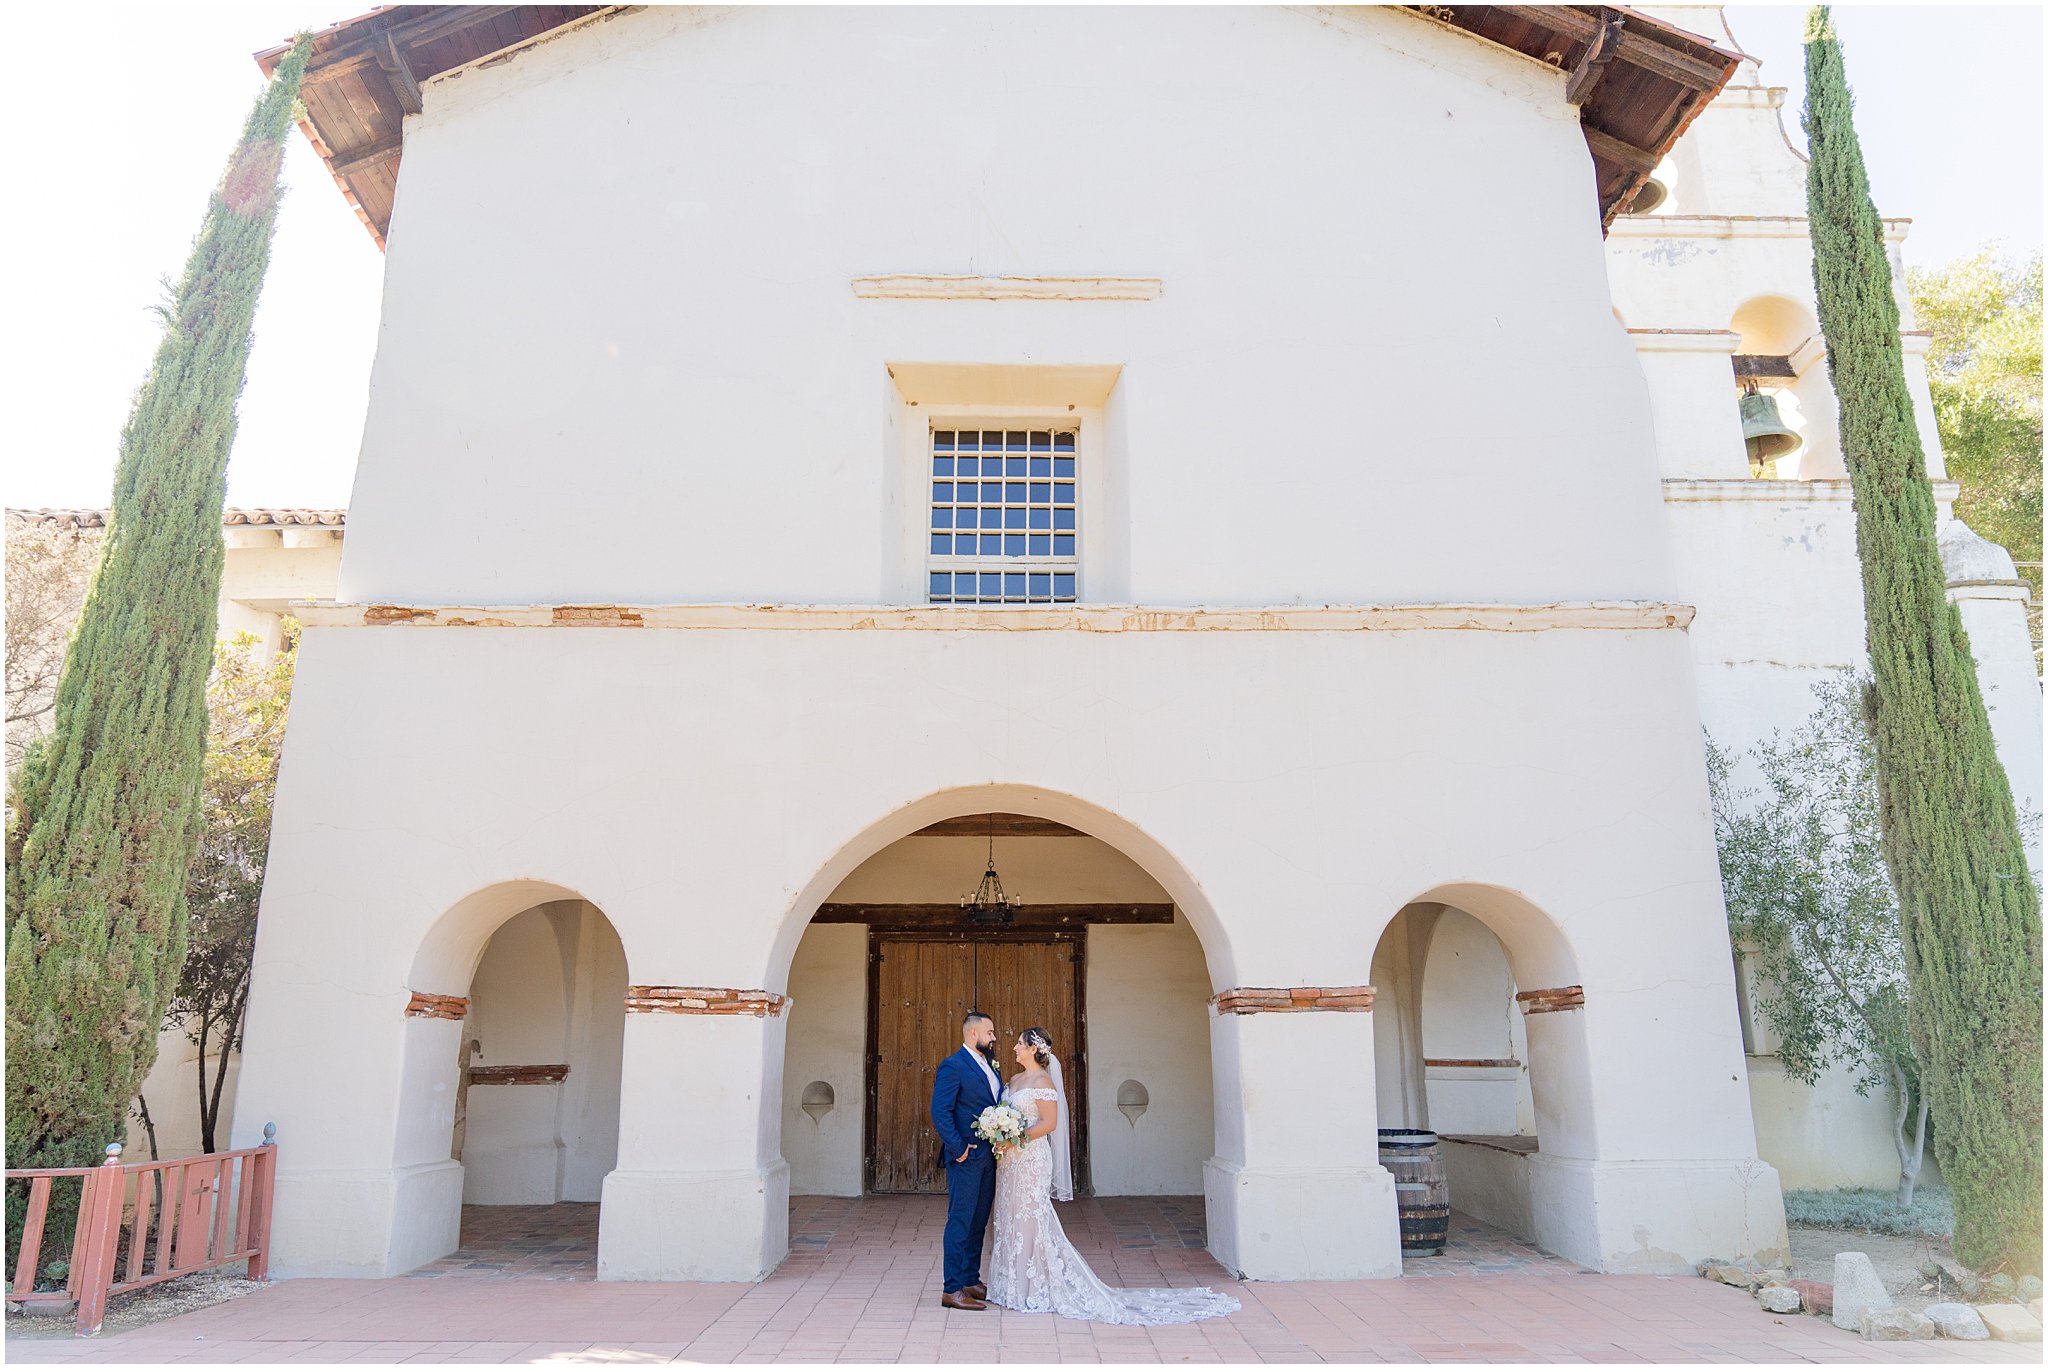 newlyweds stand in an embrace under the arches of an old mission